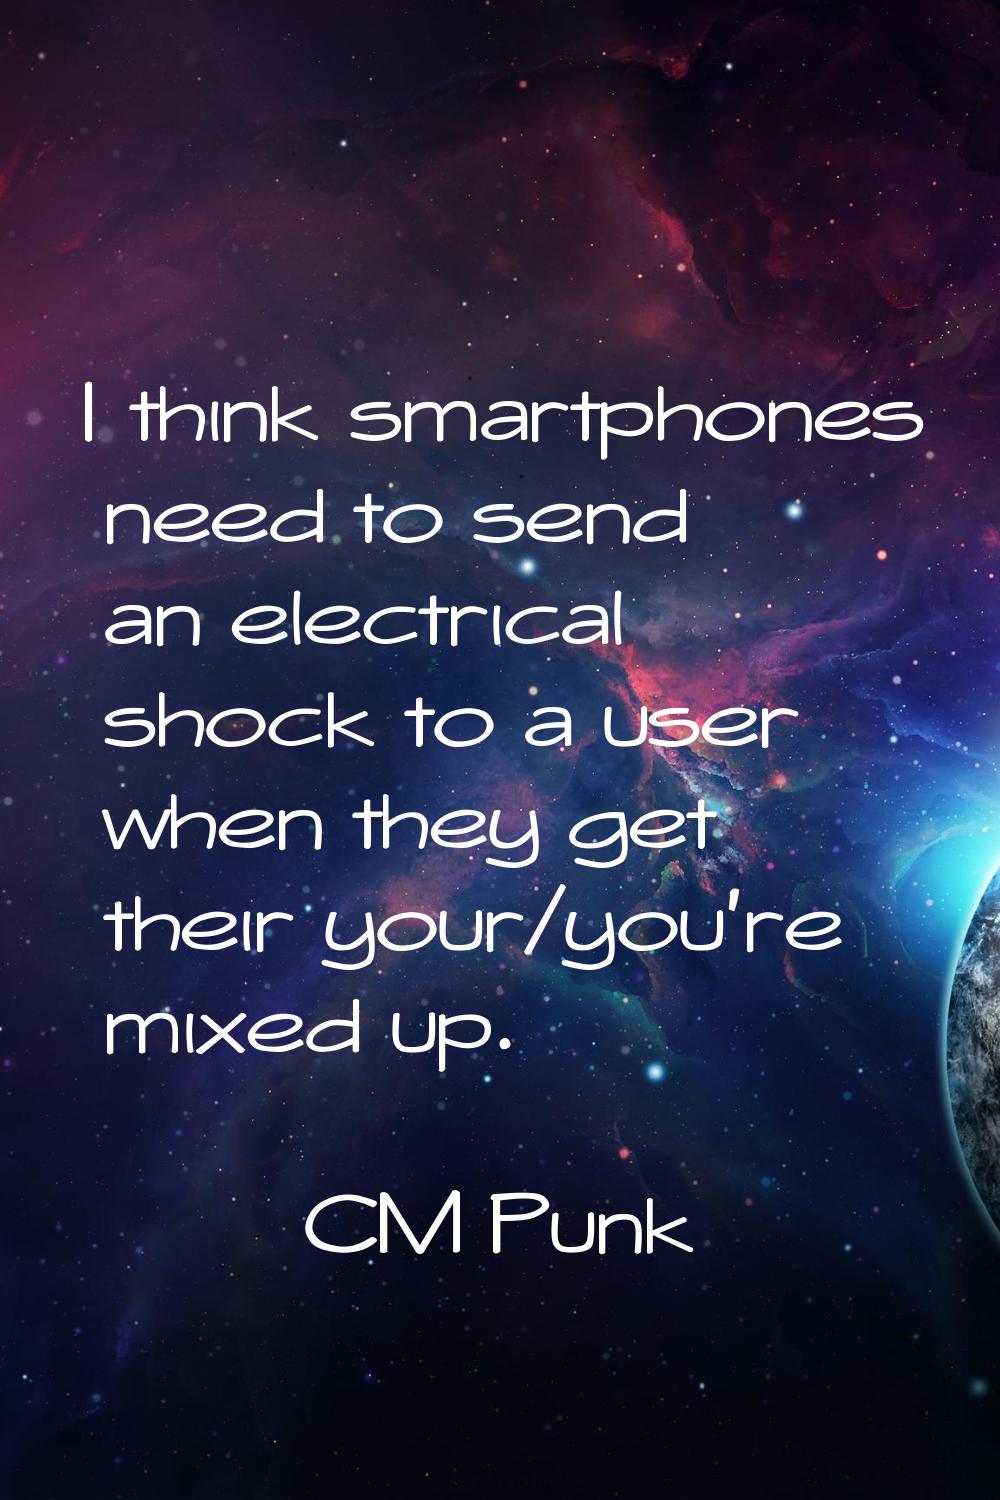 I think smartphones need to send an electrical shock to a user when they get their your/you're mixe